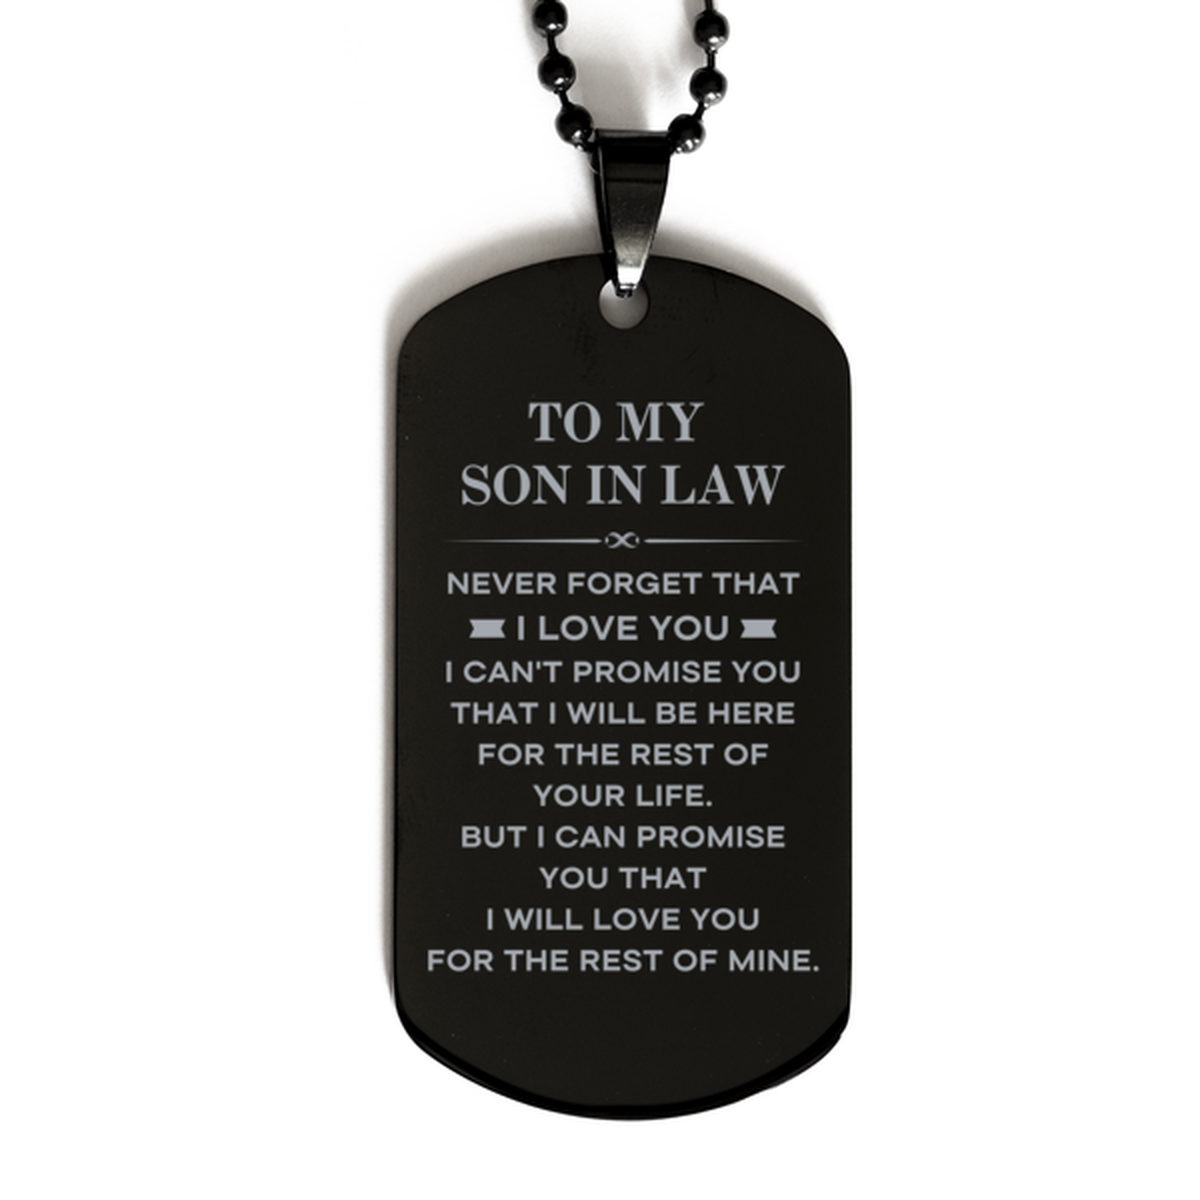 To My Son In Law Gifts, I will love you for the rest of mine, Love Son In Law Dog Tag Necklace, Birthday Christmas Unique Black Dog Tag For Son In Law